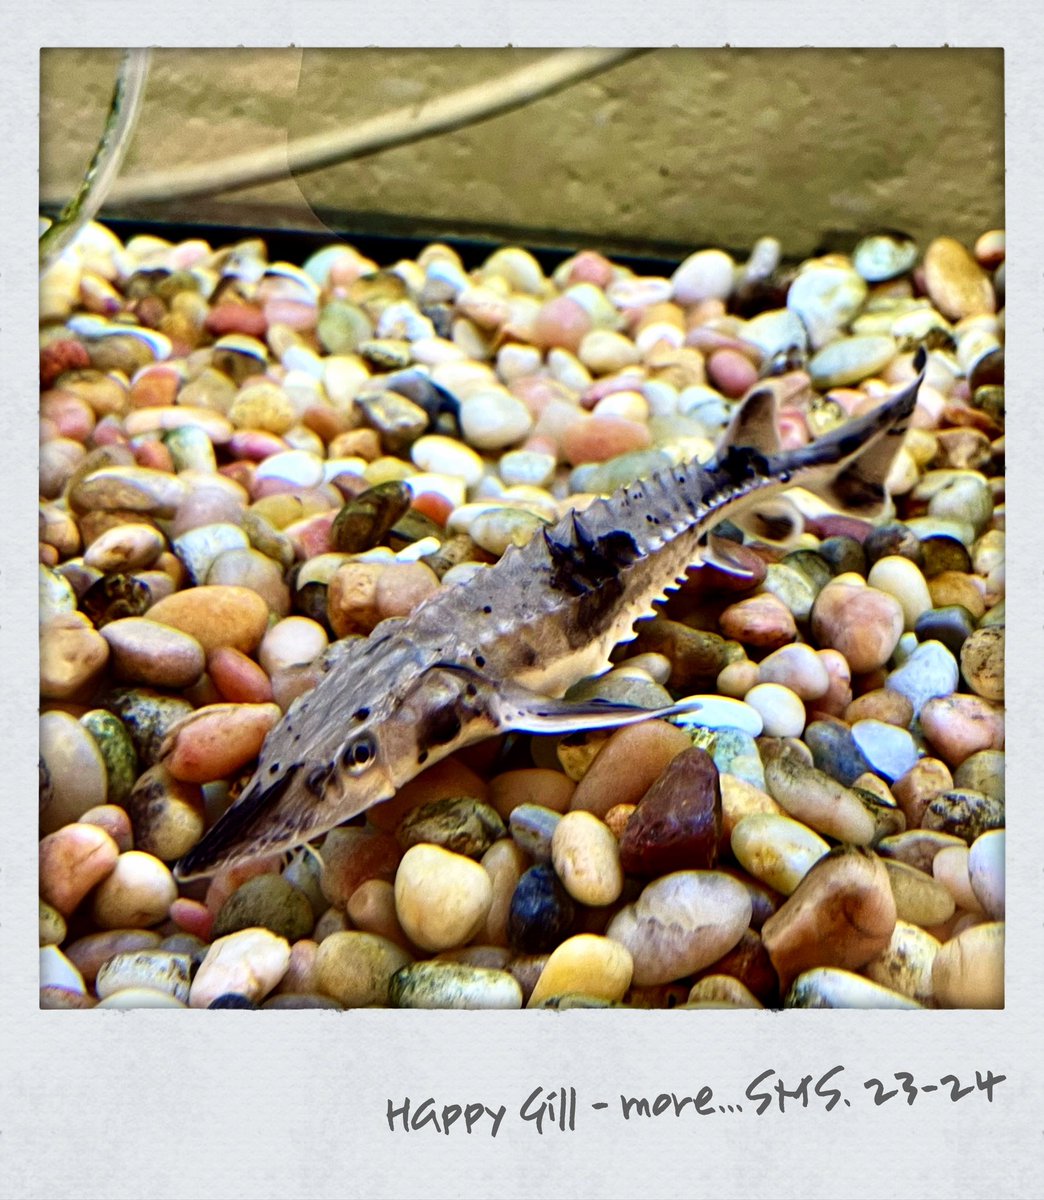 Meet Happy Gill-more!! 21,698 votes cast in our Name the Lake Sturgeon contest. Happy is calling Shumate MS home until June 2024. Then, Detroit River. @darrincamilleri @Jaime_Churches @RepDebDingell @superGSD @GSDacademics @ShumateAP @richbacolor @k12science #GettingScienceDone